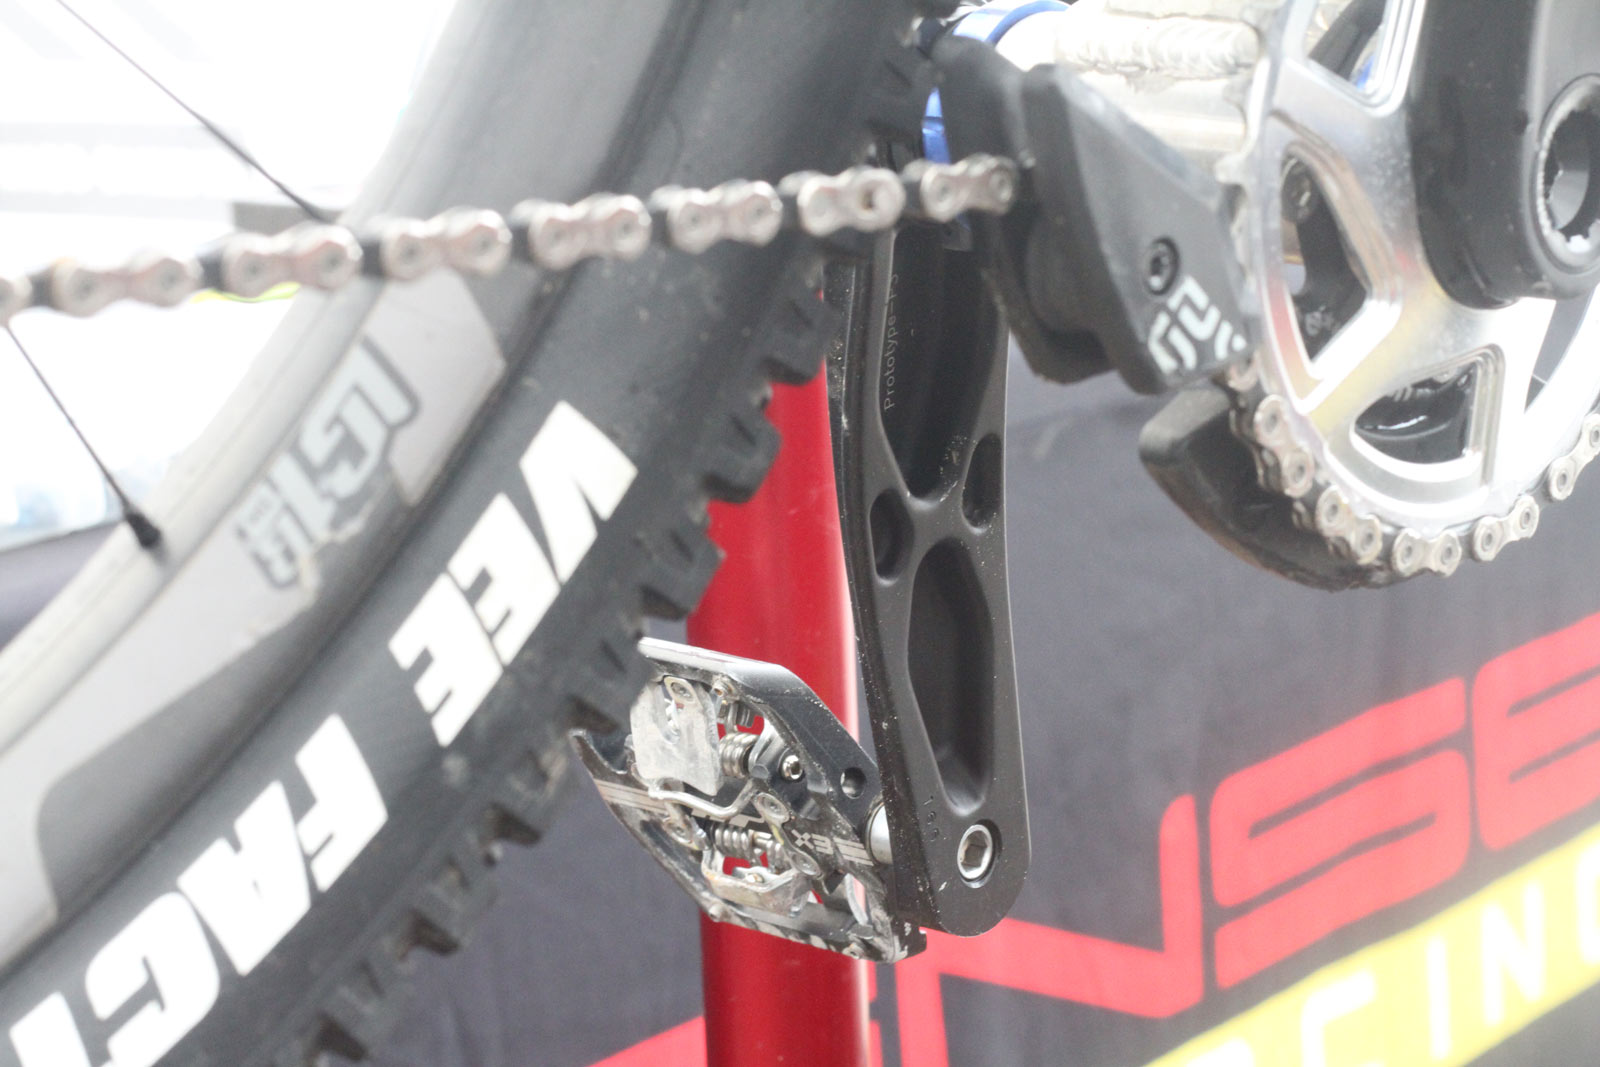 prototype dh crankset from trp on aaron gwins intense